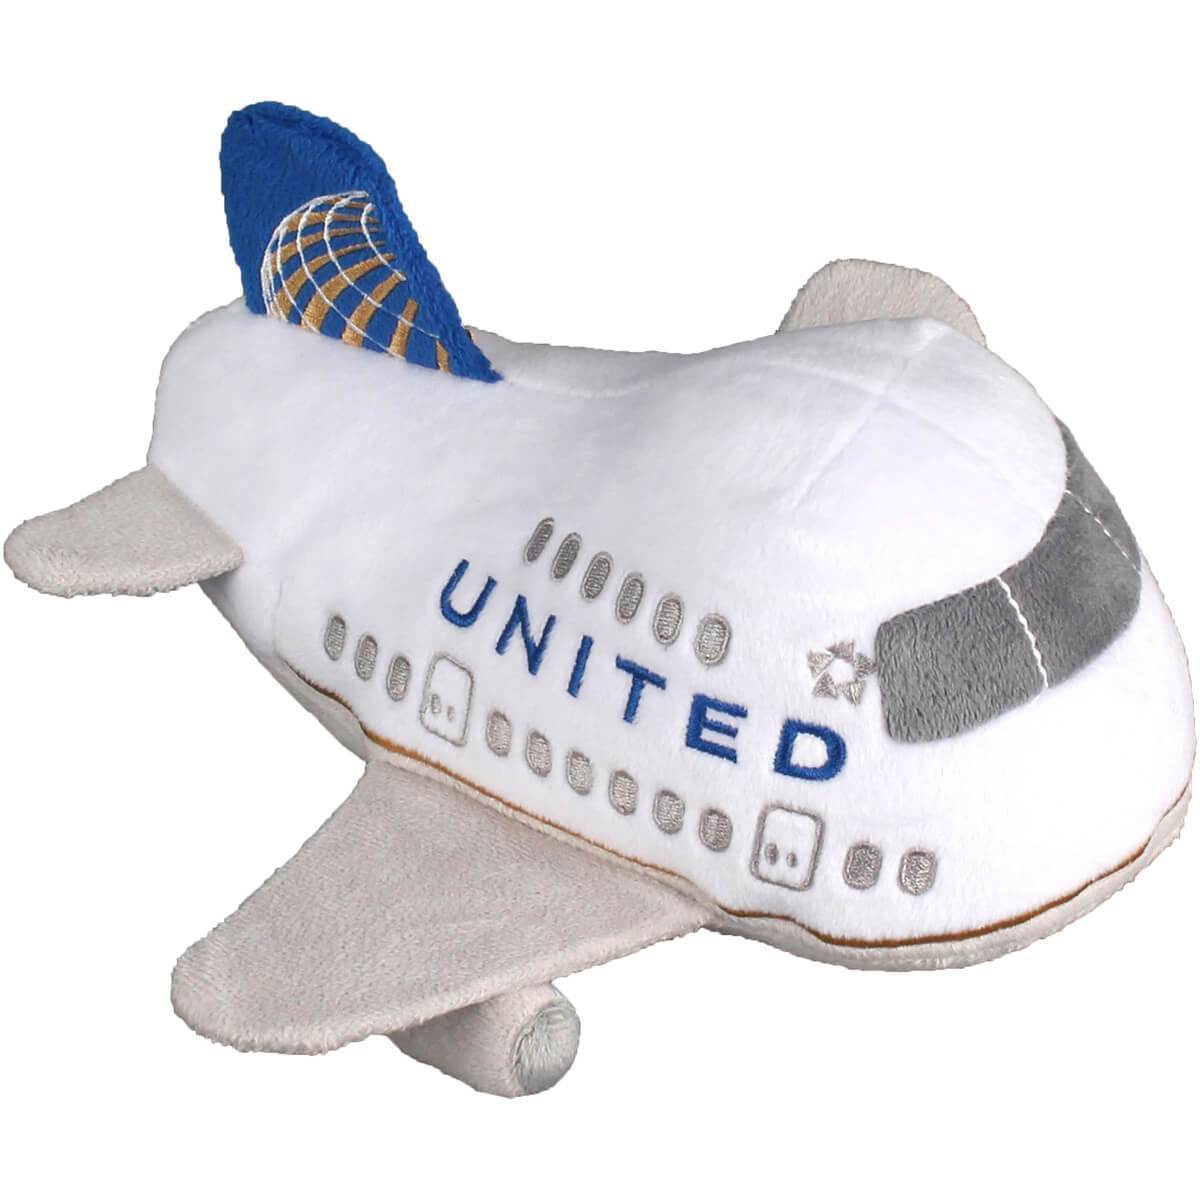  United Airlines Plush Toy w/Sound